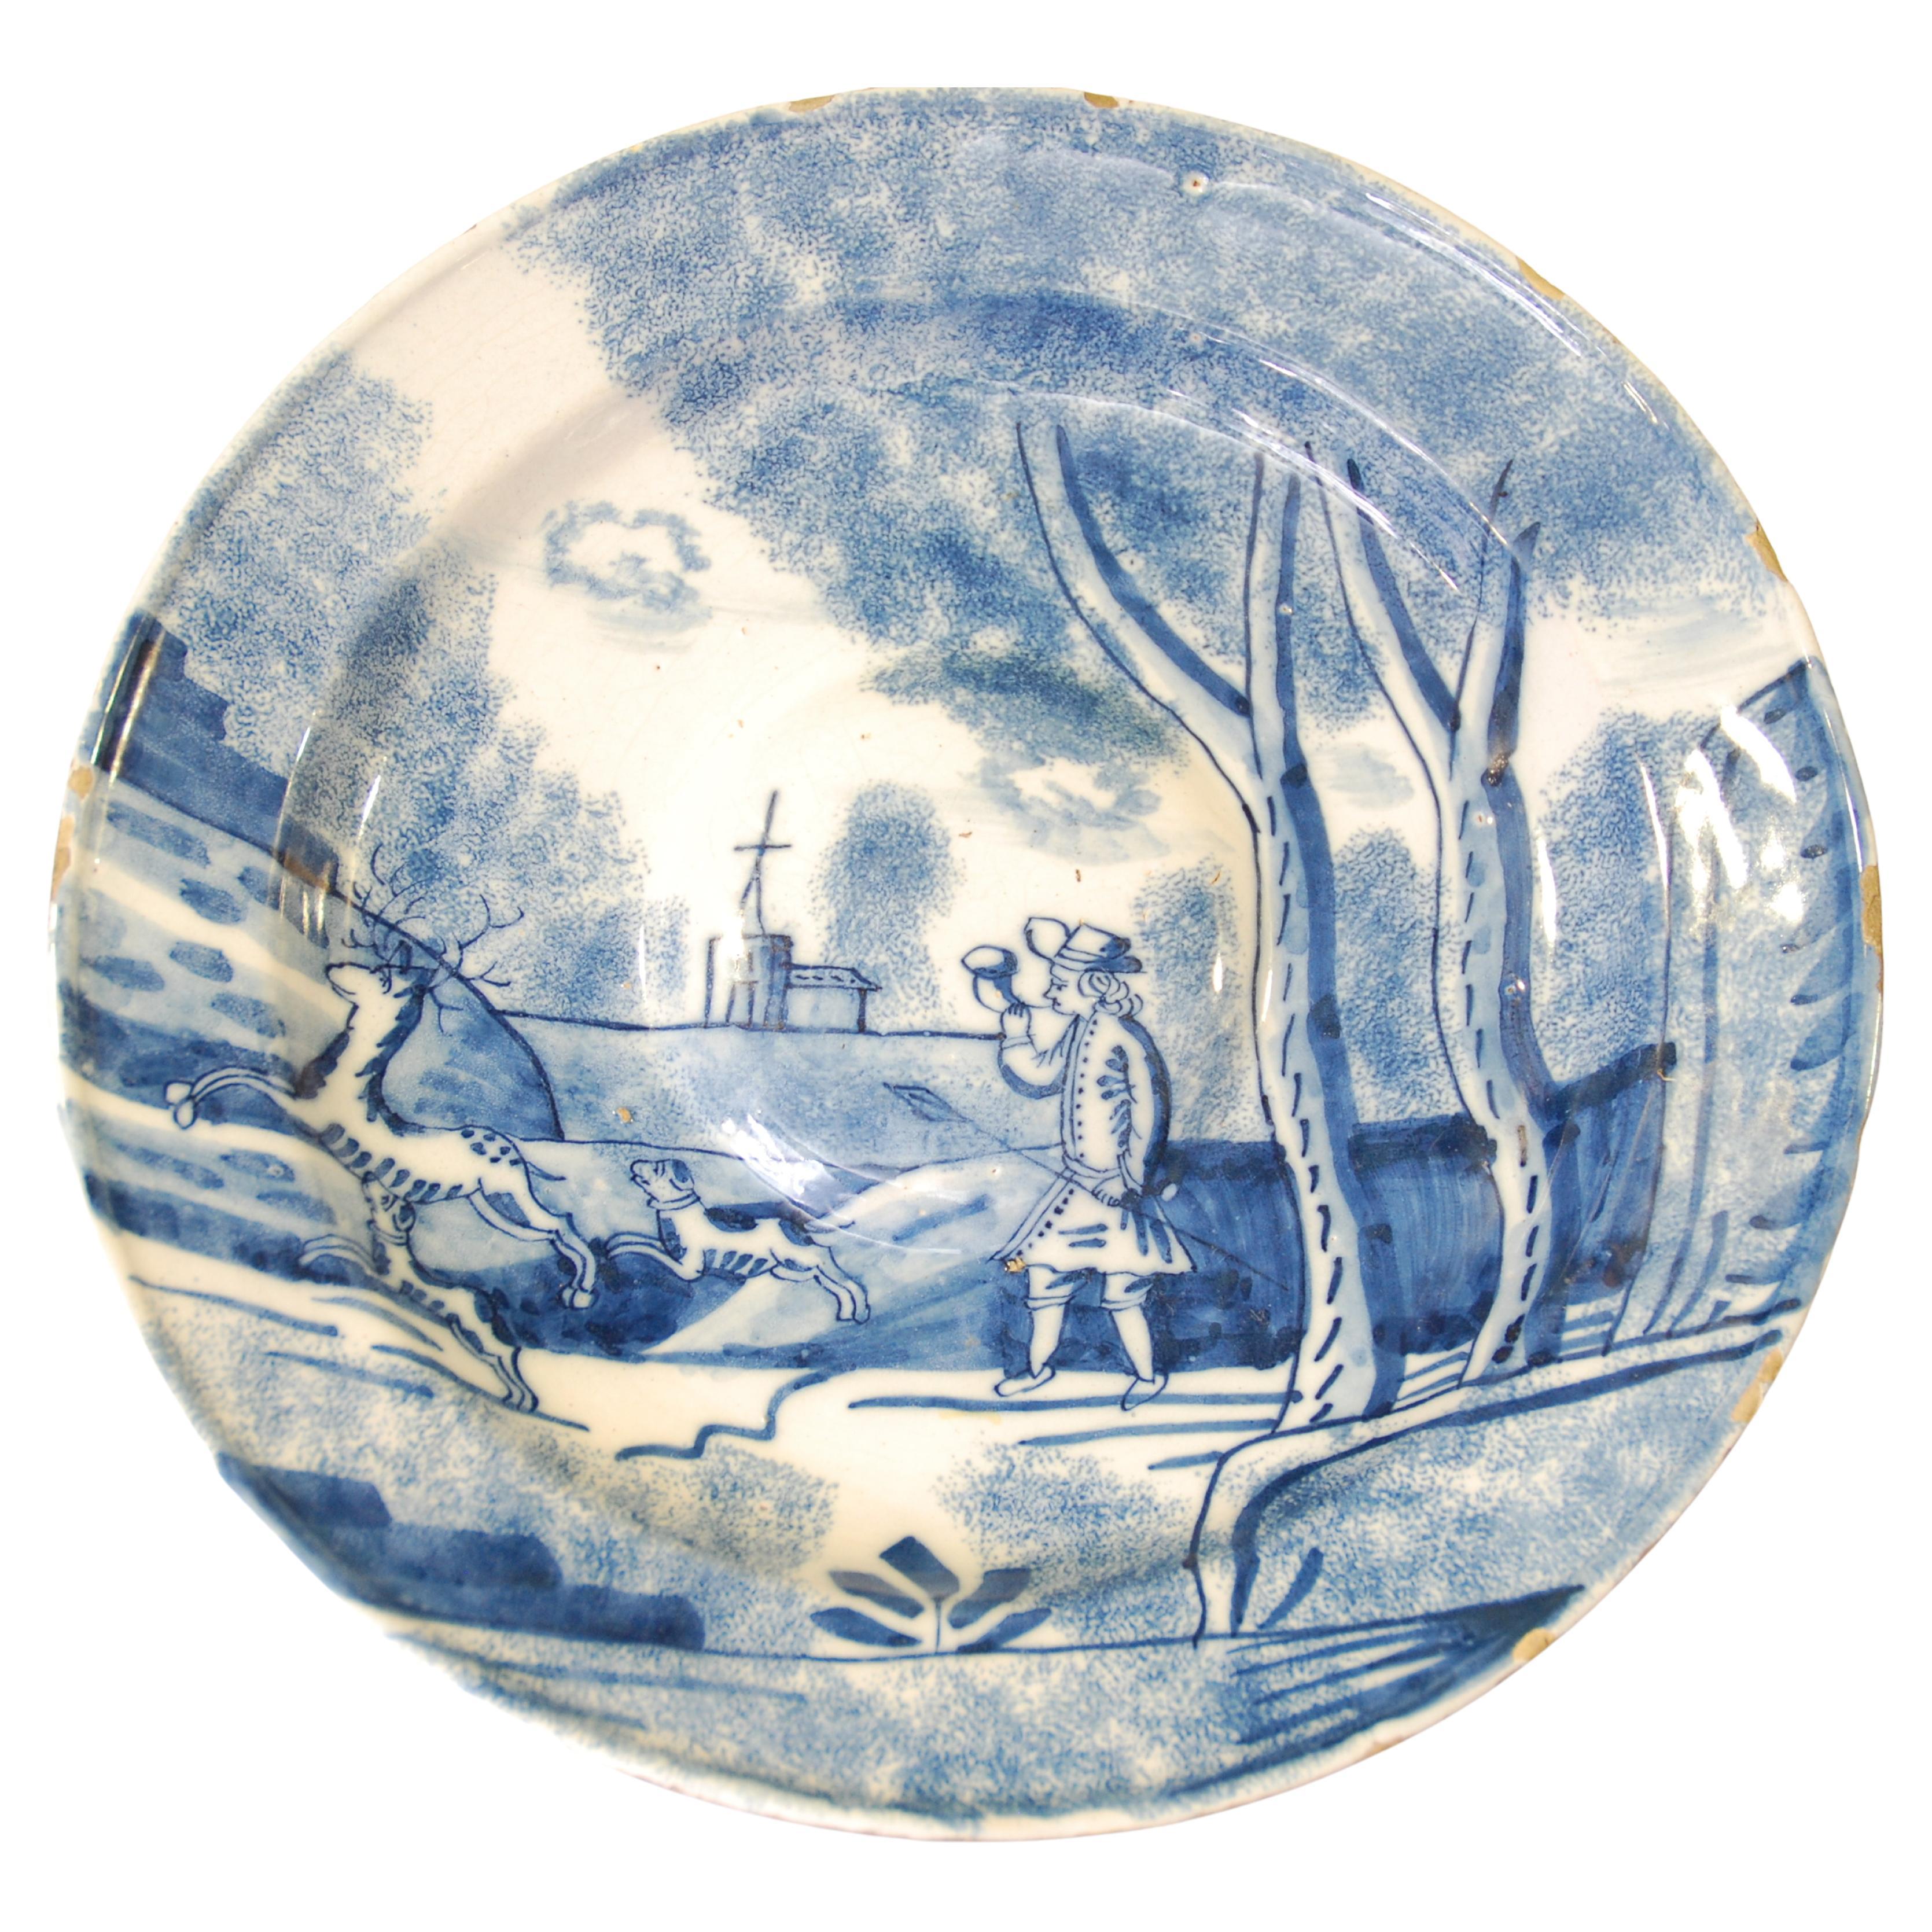 Delft Charger, Coursing a Stag, English, circa 1710